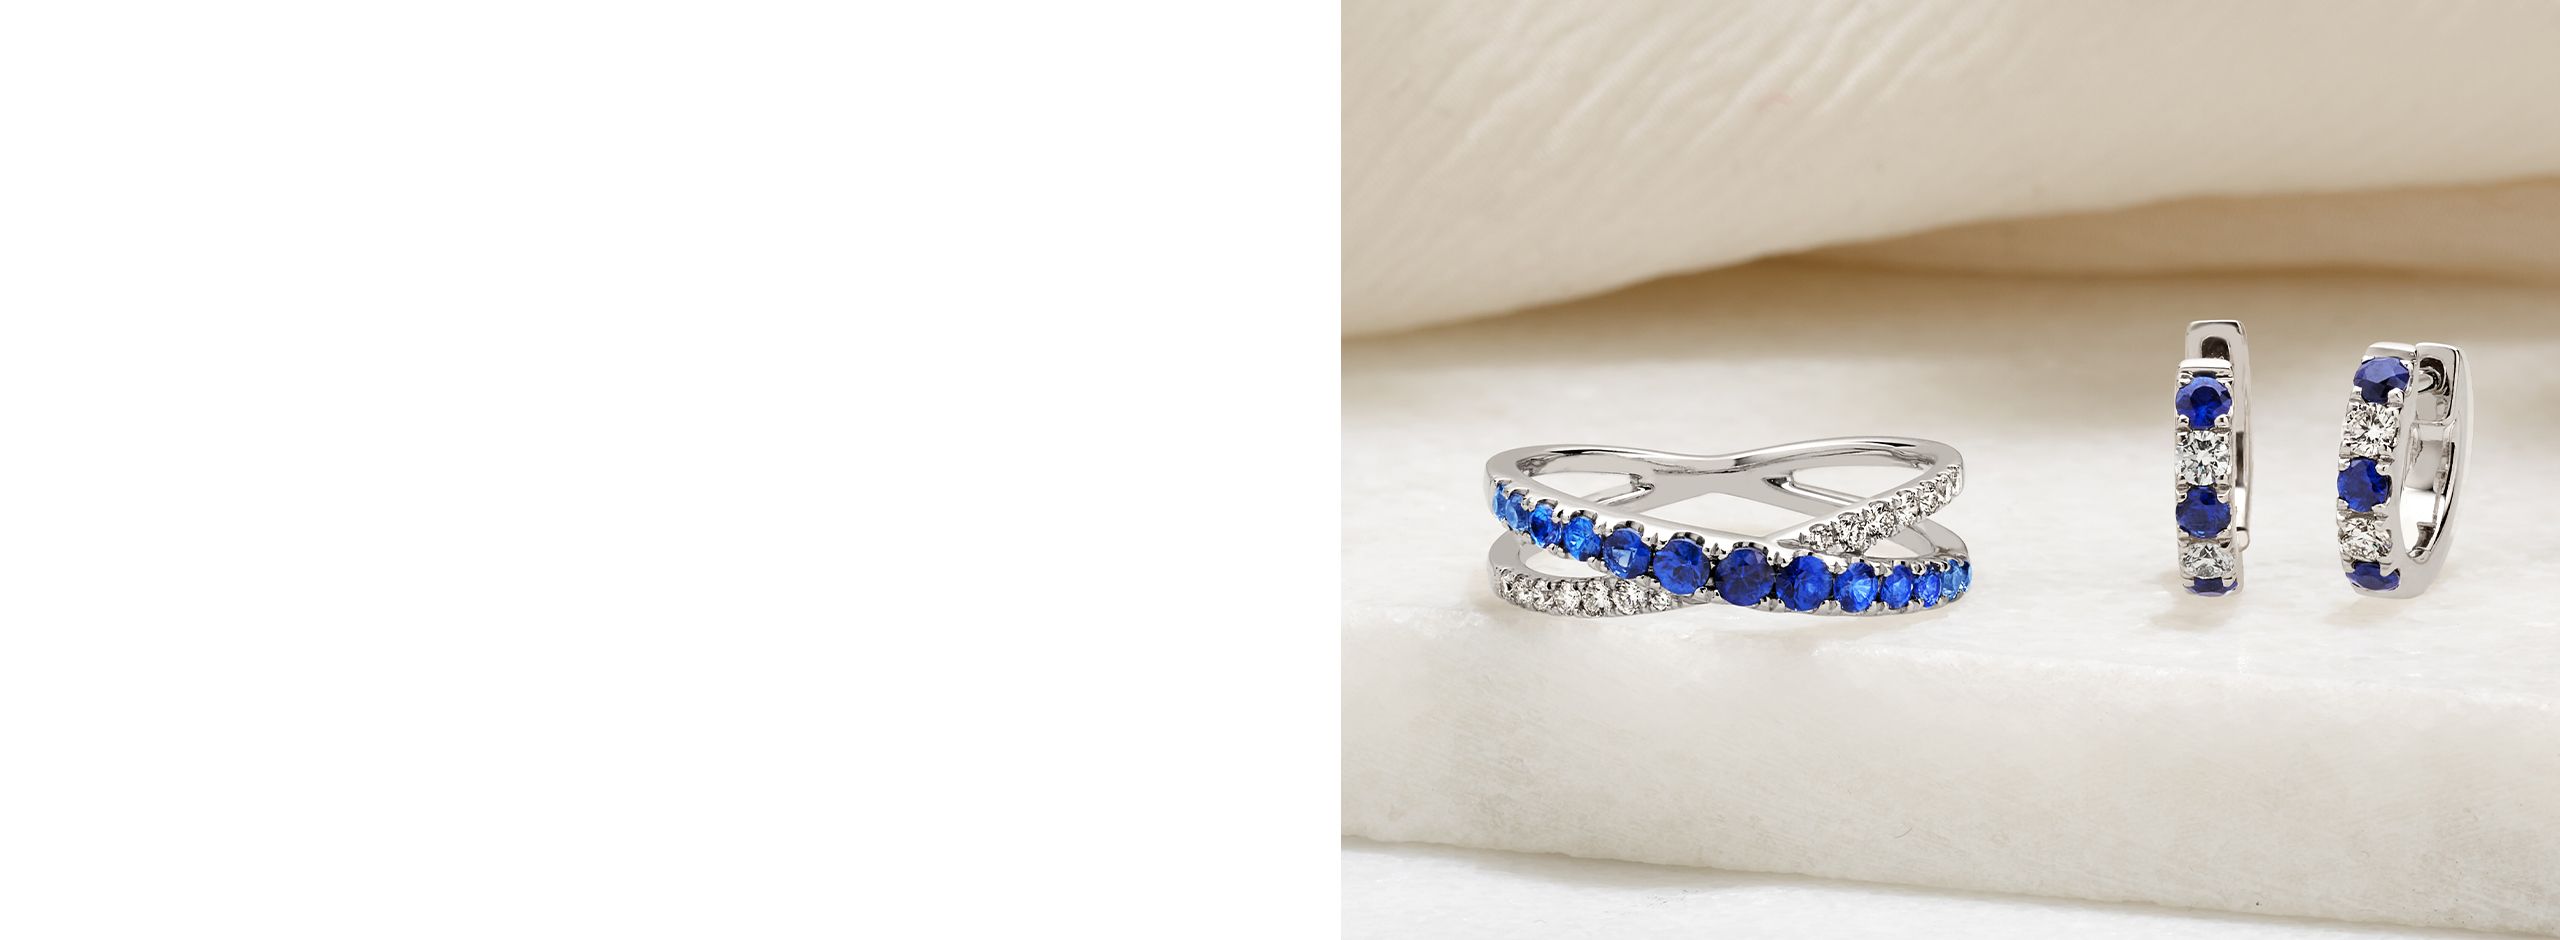 Desktop imag of a sapphire fashion ring and a pair of sapphire and diamond hoop earrings